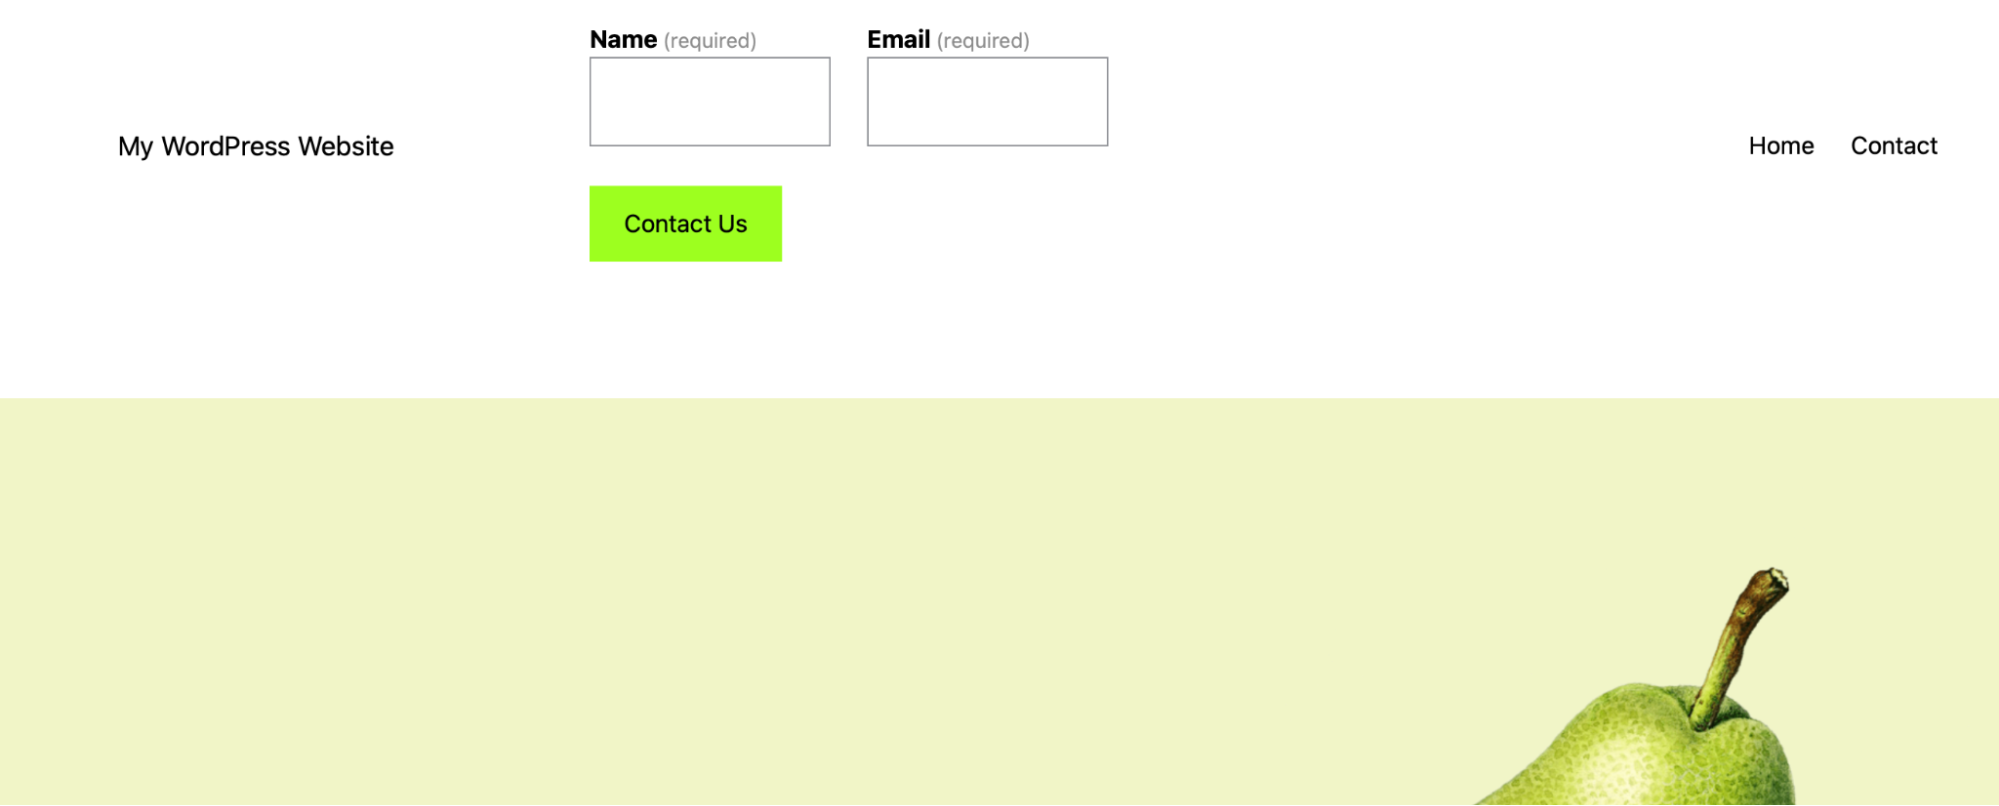 a simplified contact form in the header, with just name and email fields